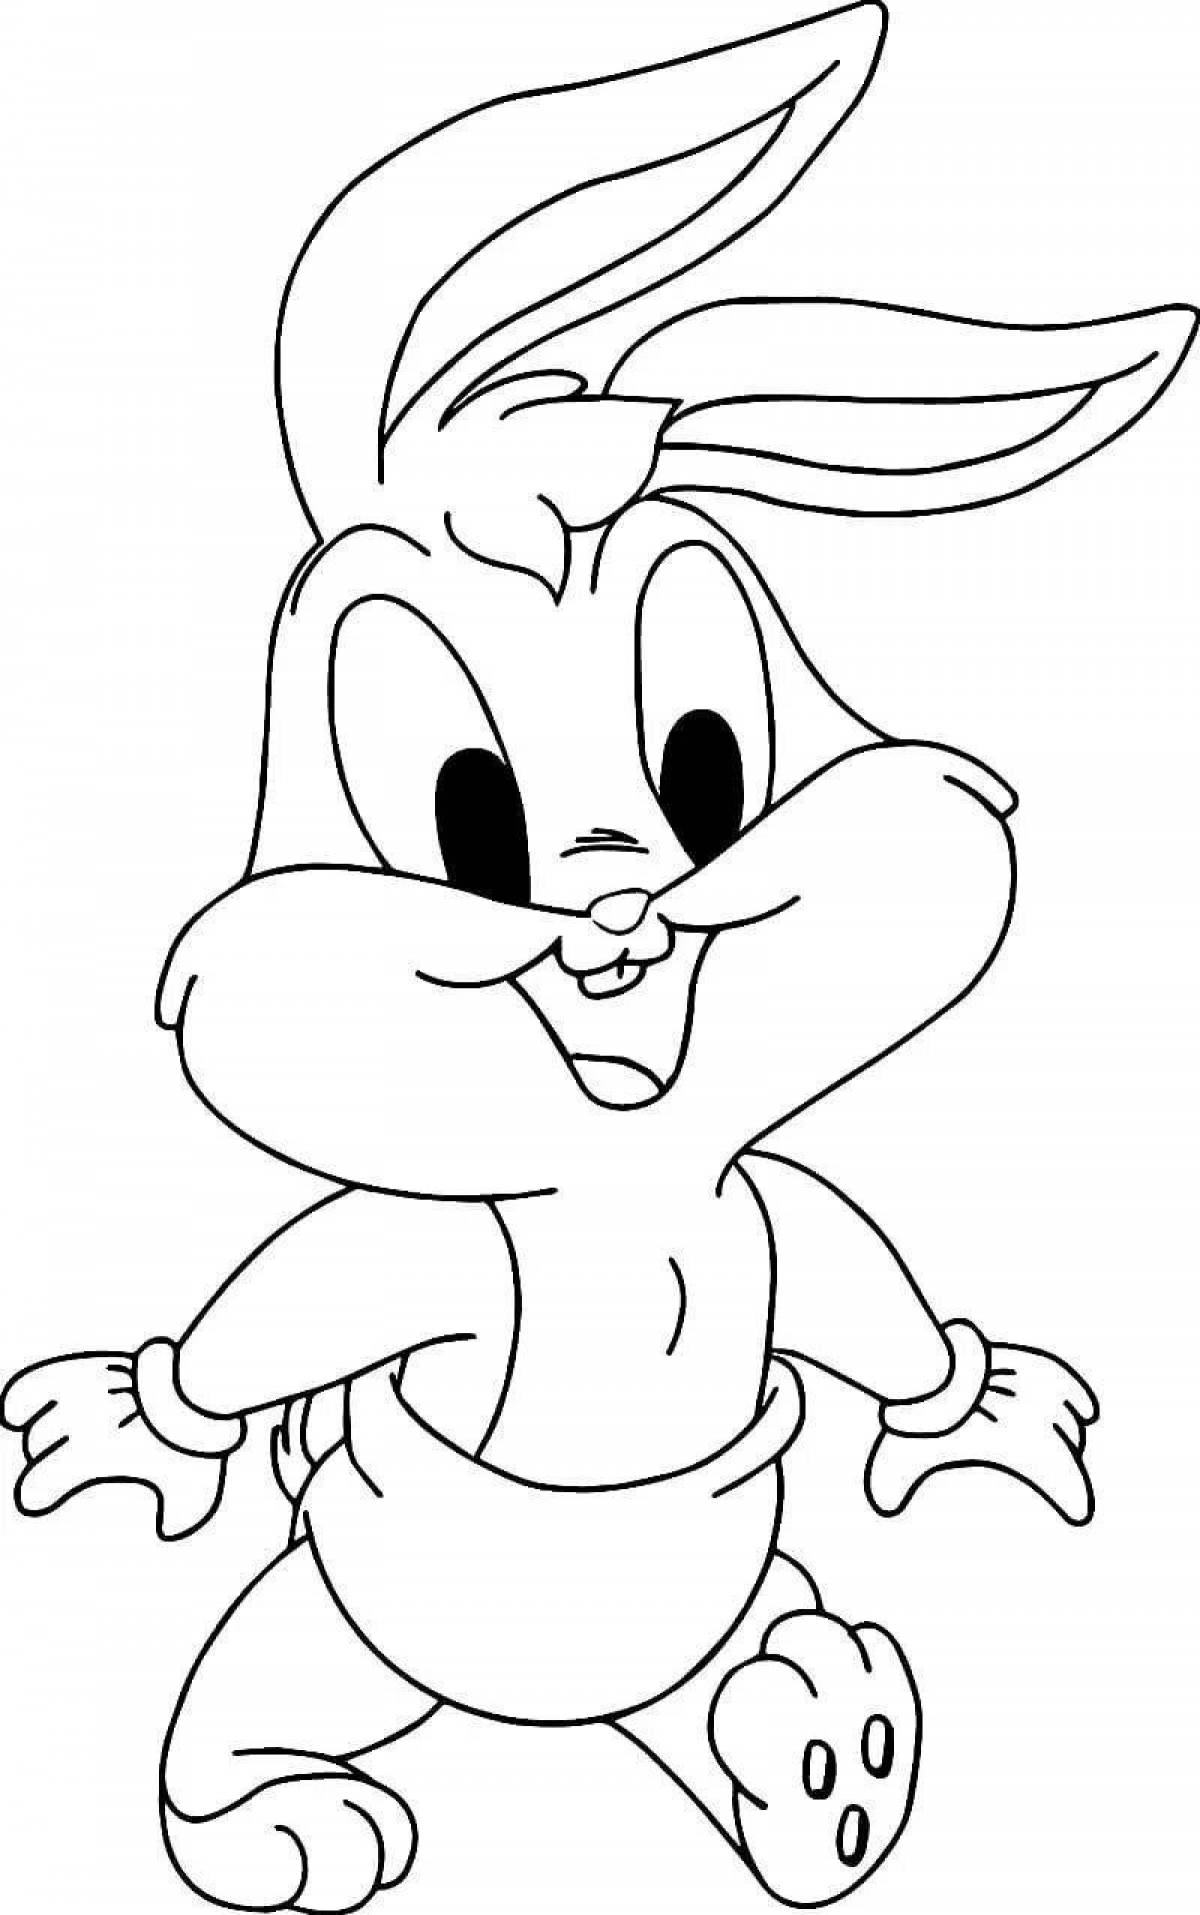 Funny cartoon hare coloring book